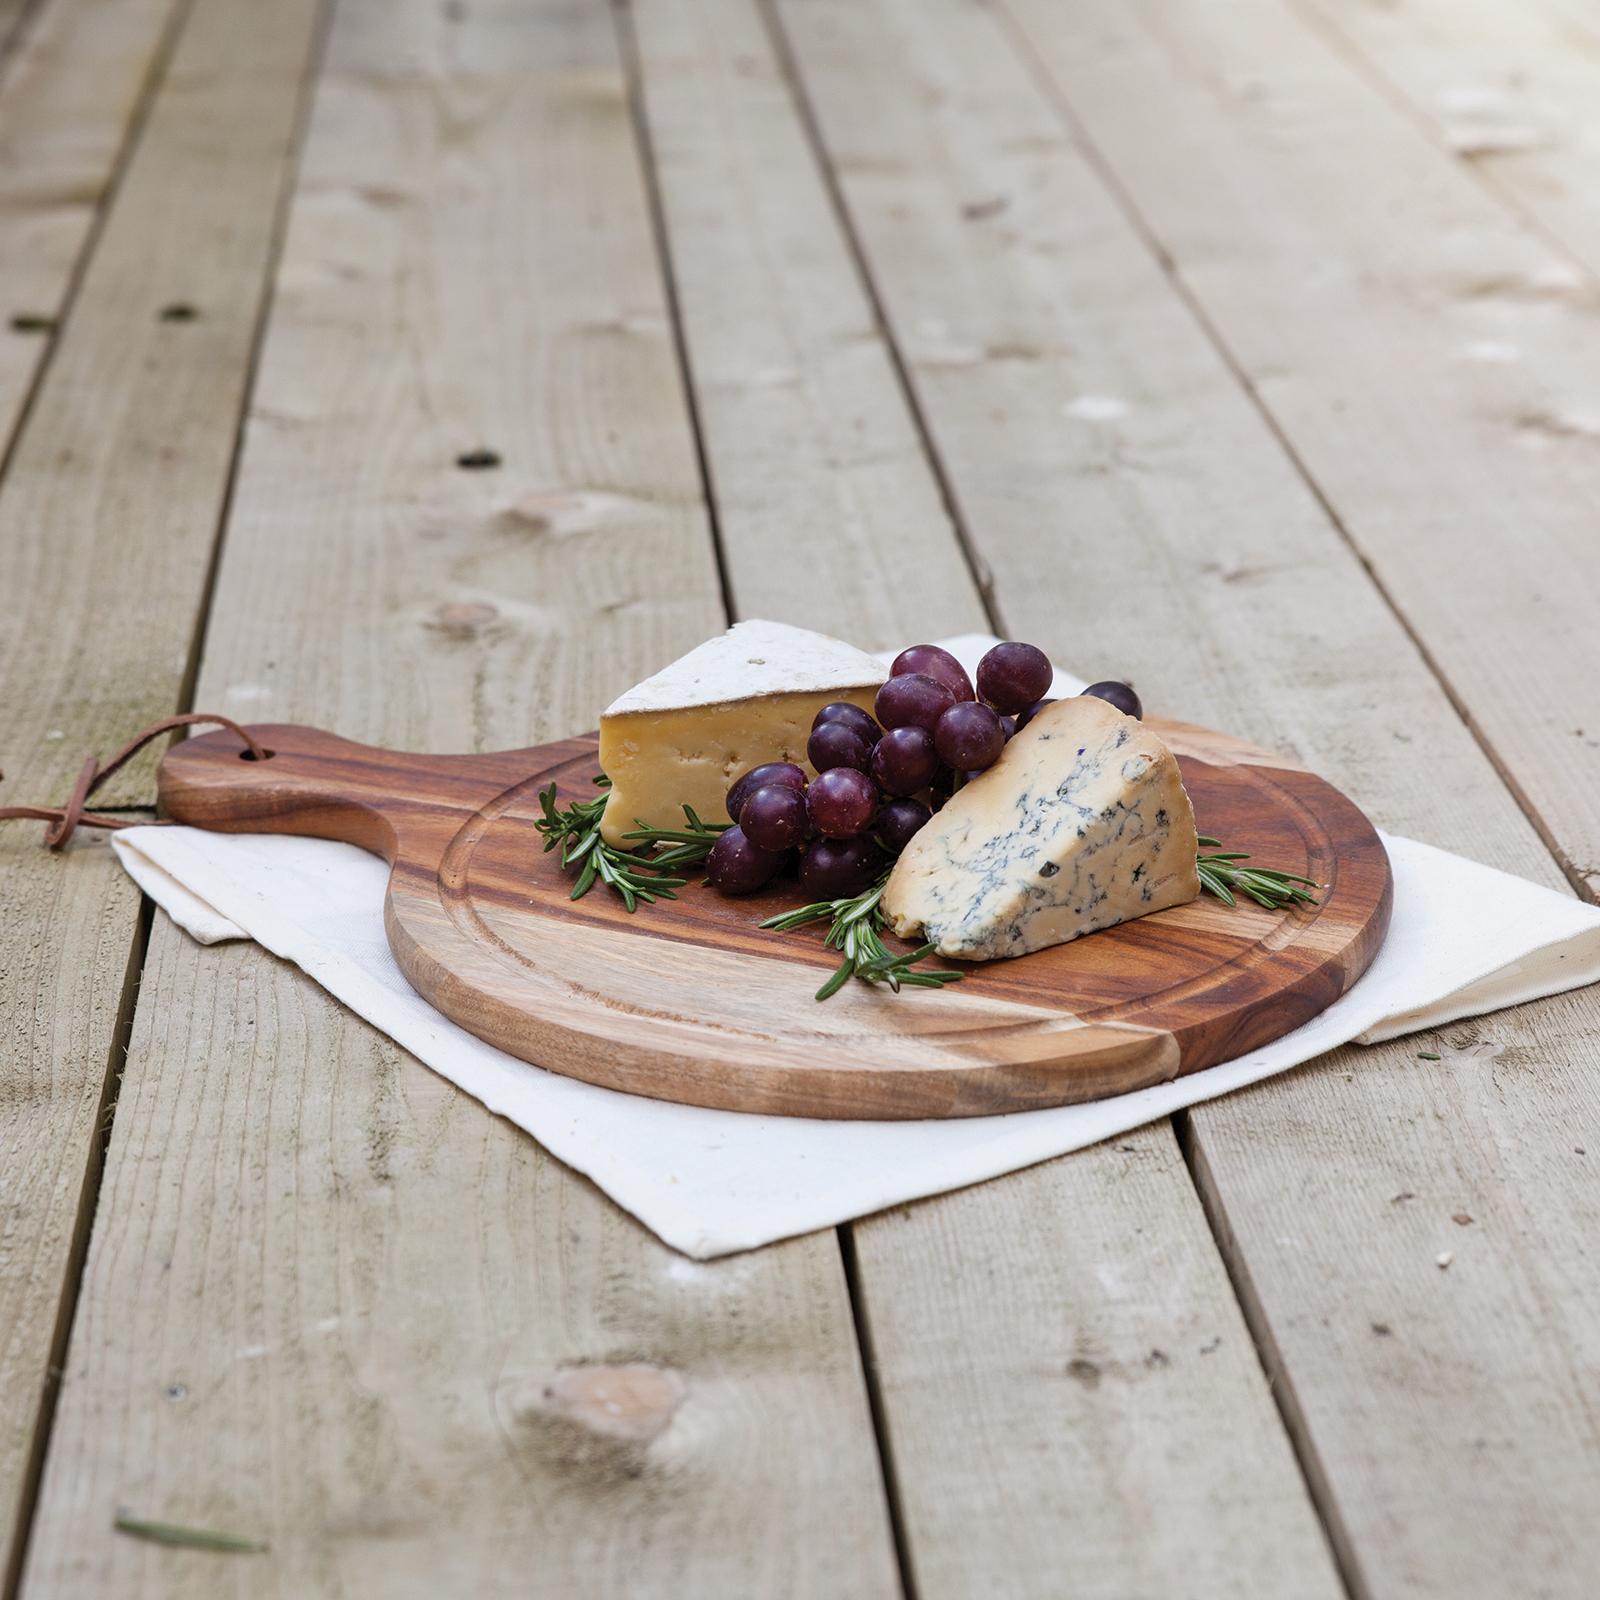 Rustic Farmhouse: Gourmet Cheese Knives by Twine (Set of 4)